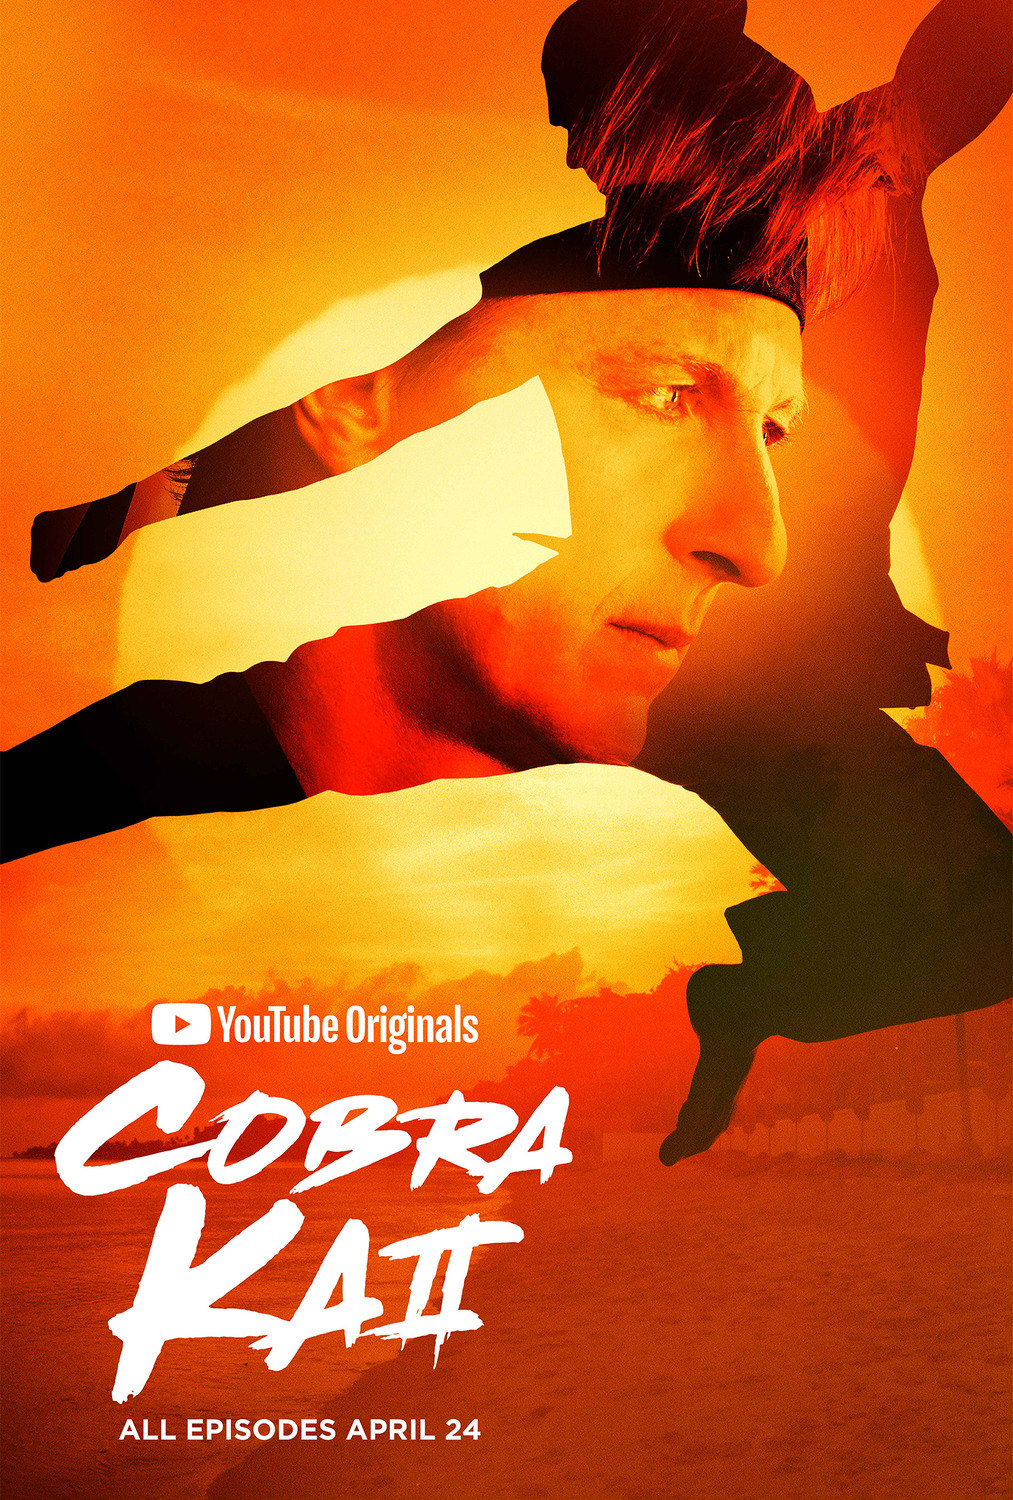 Extra Large TV Poster Image for Cobra Kai (#6 of 20)